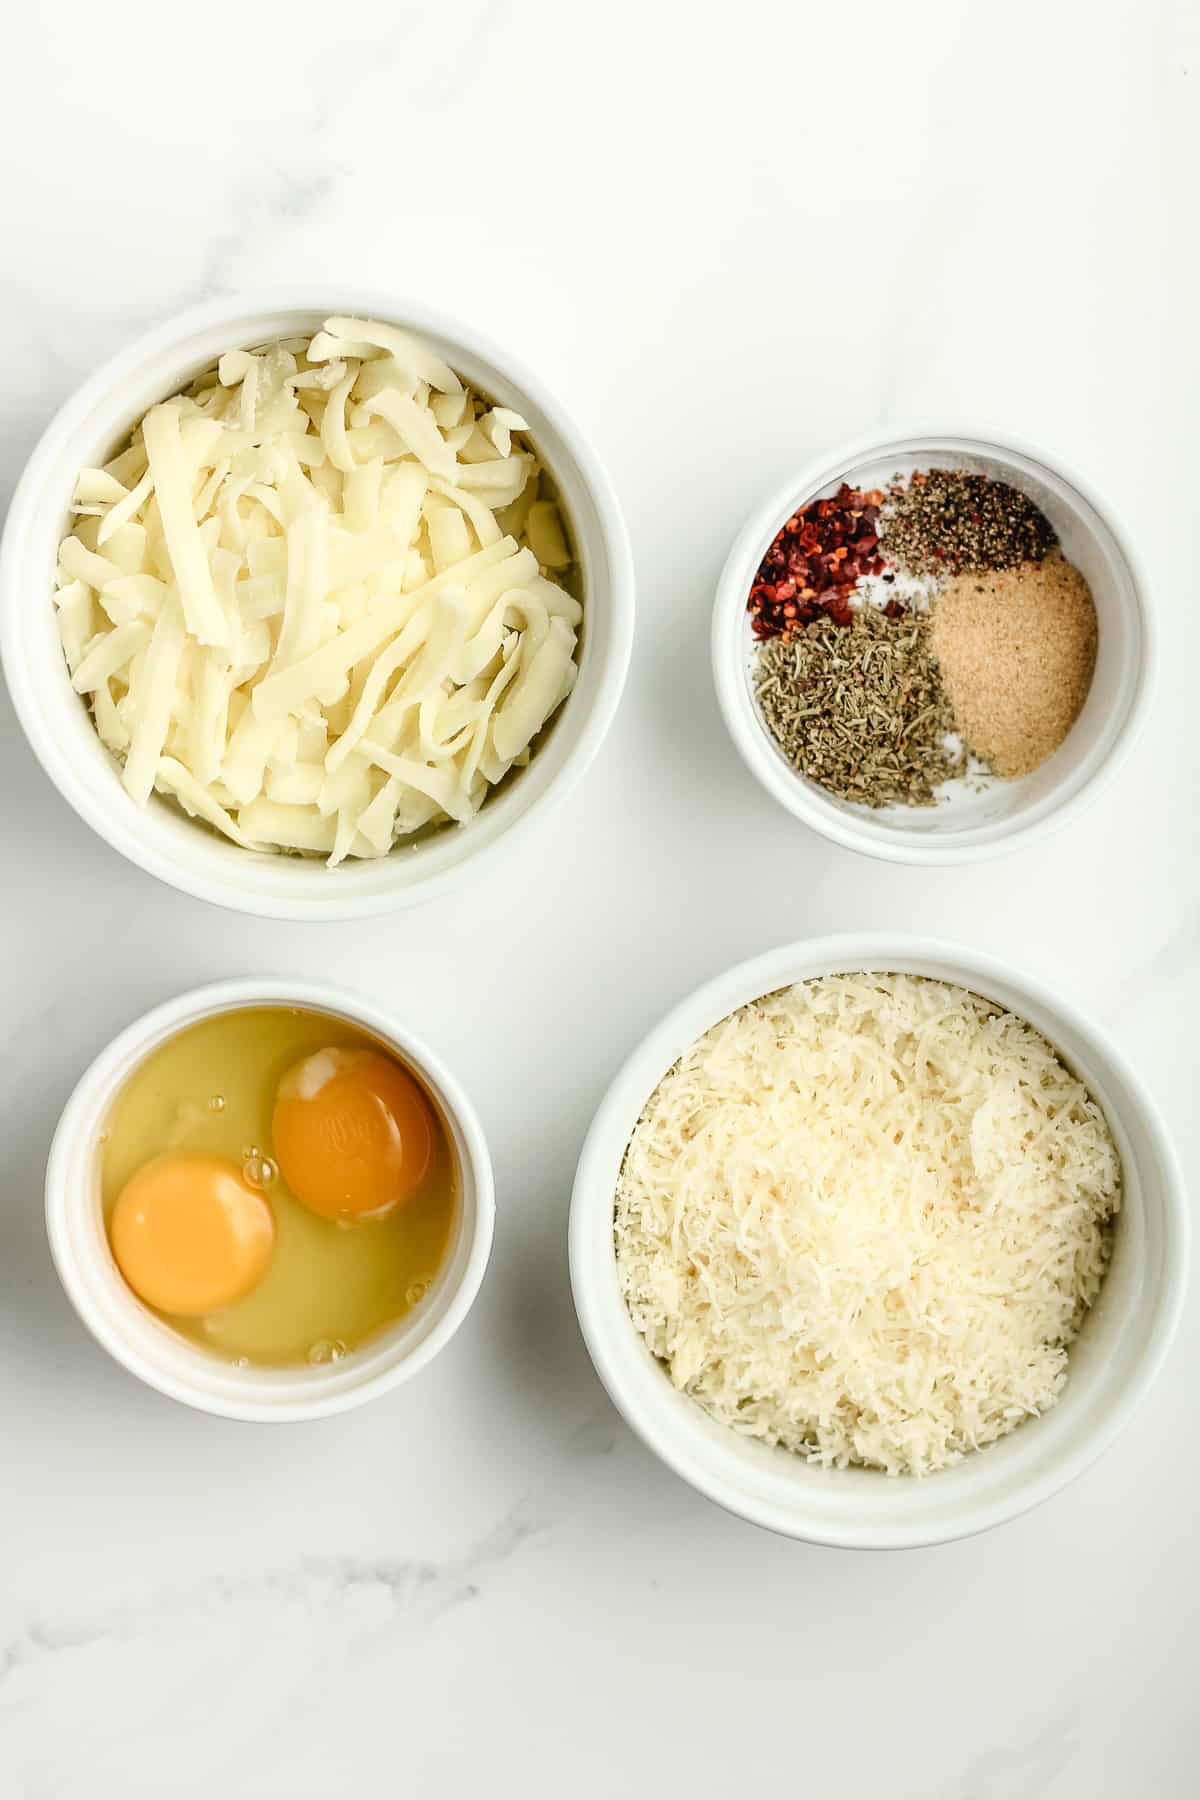 Four bowls of the cauliflower pizza crust ingredients.